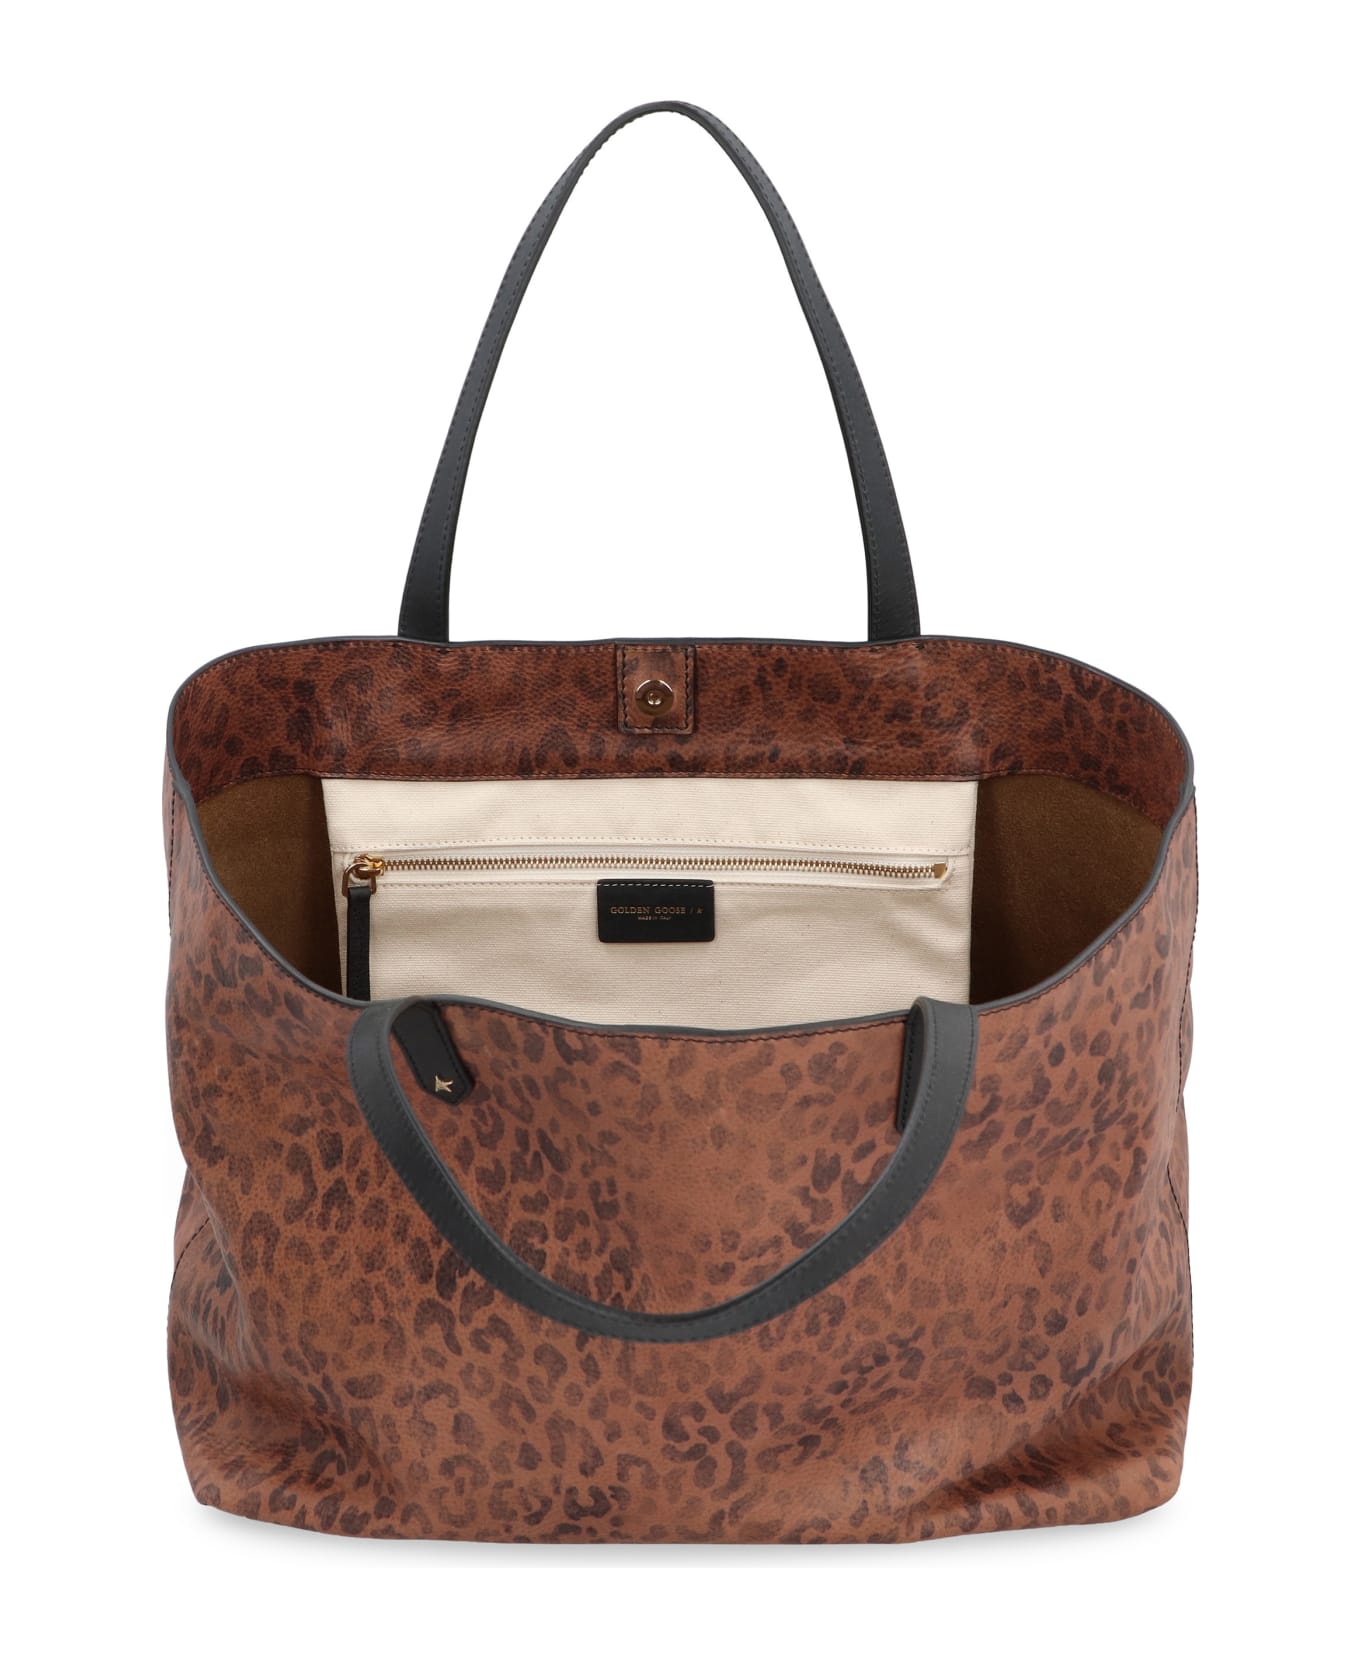 Golden Goose Pasadena Leather Tote - Animalier トートバッグ